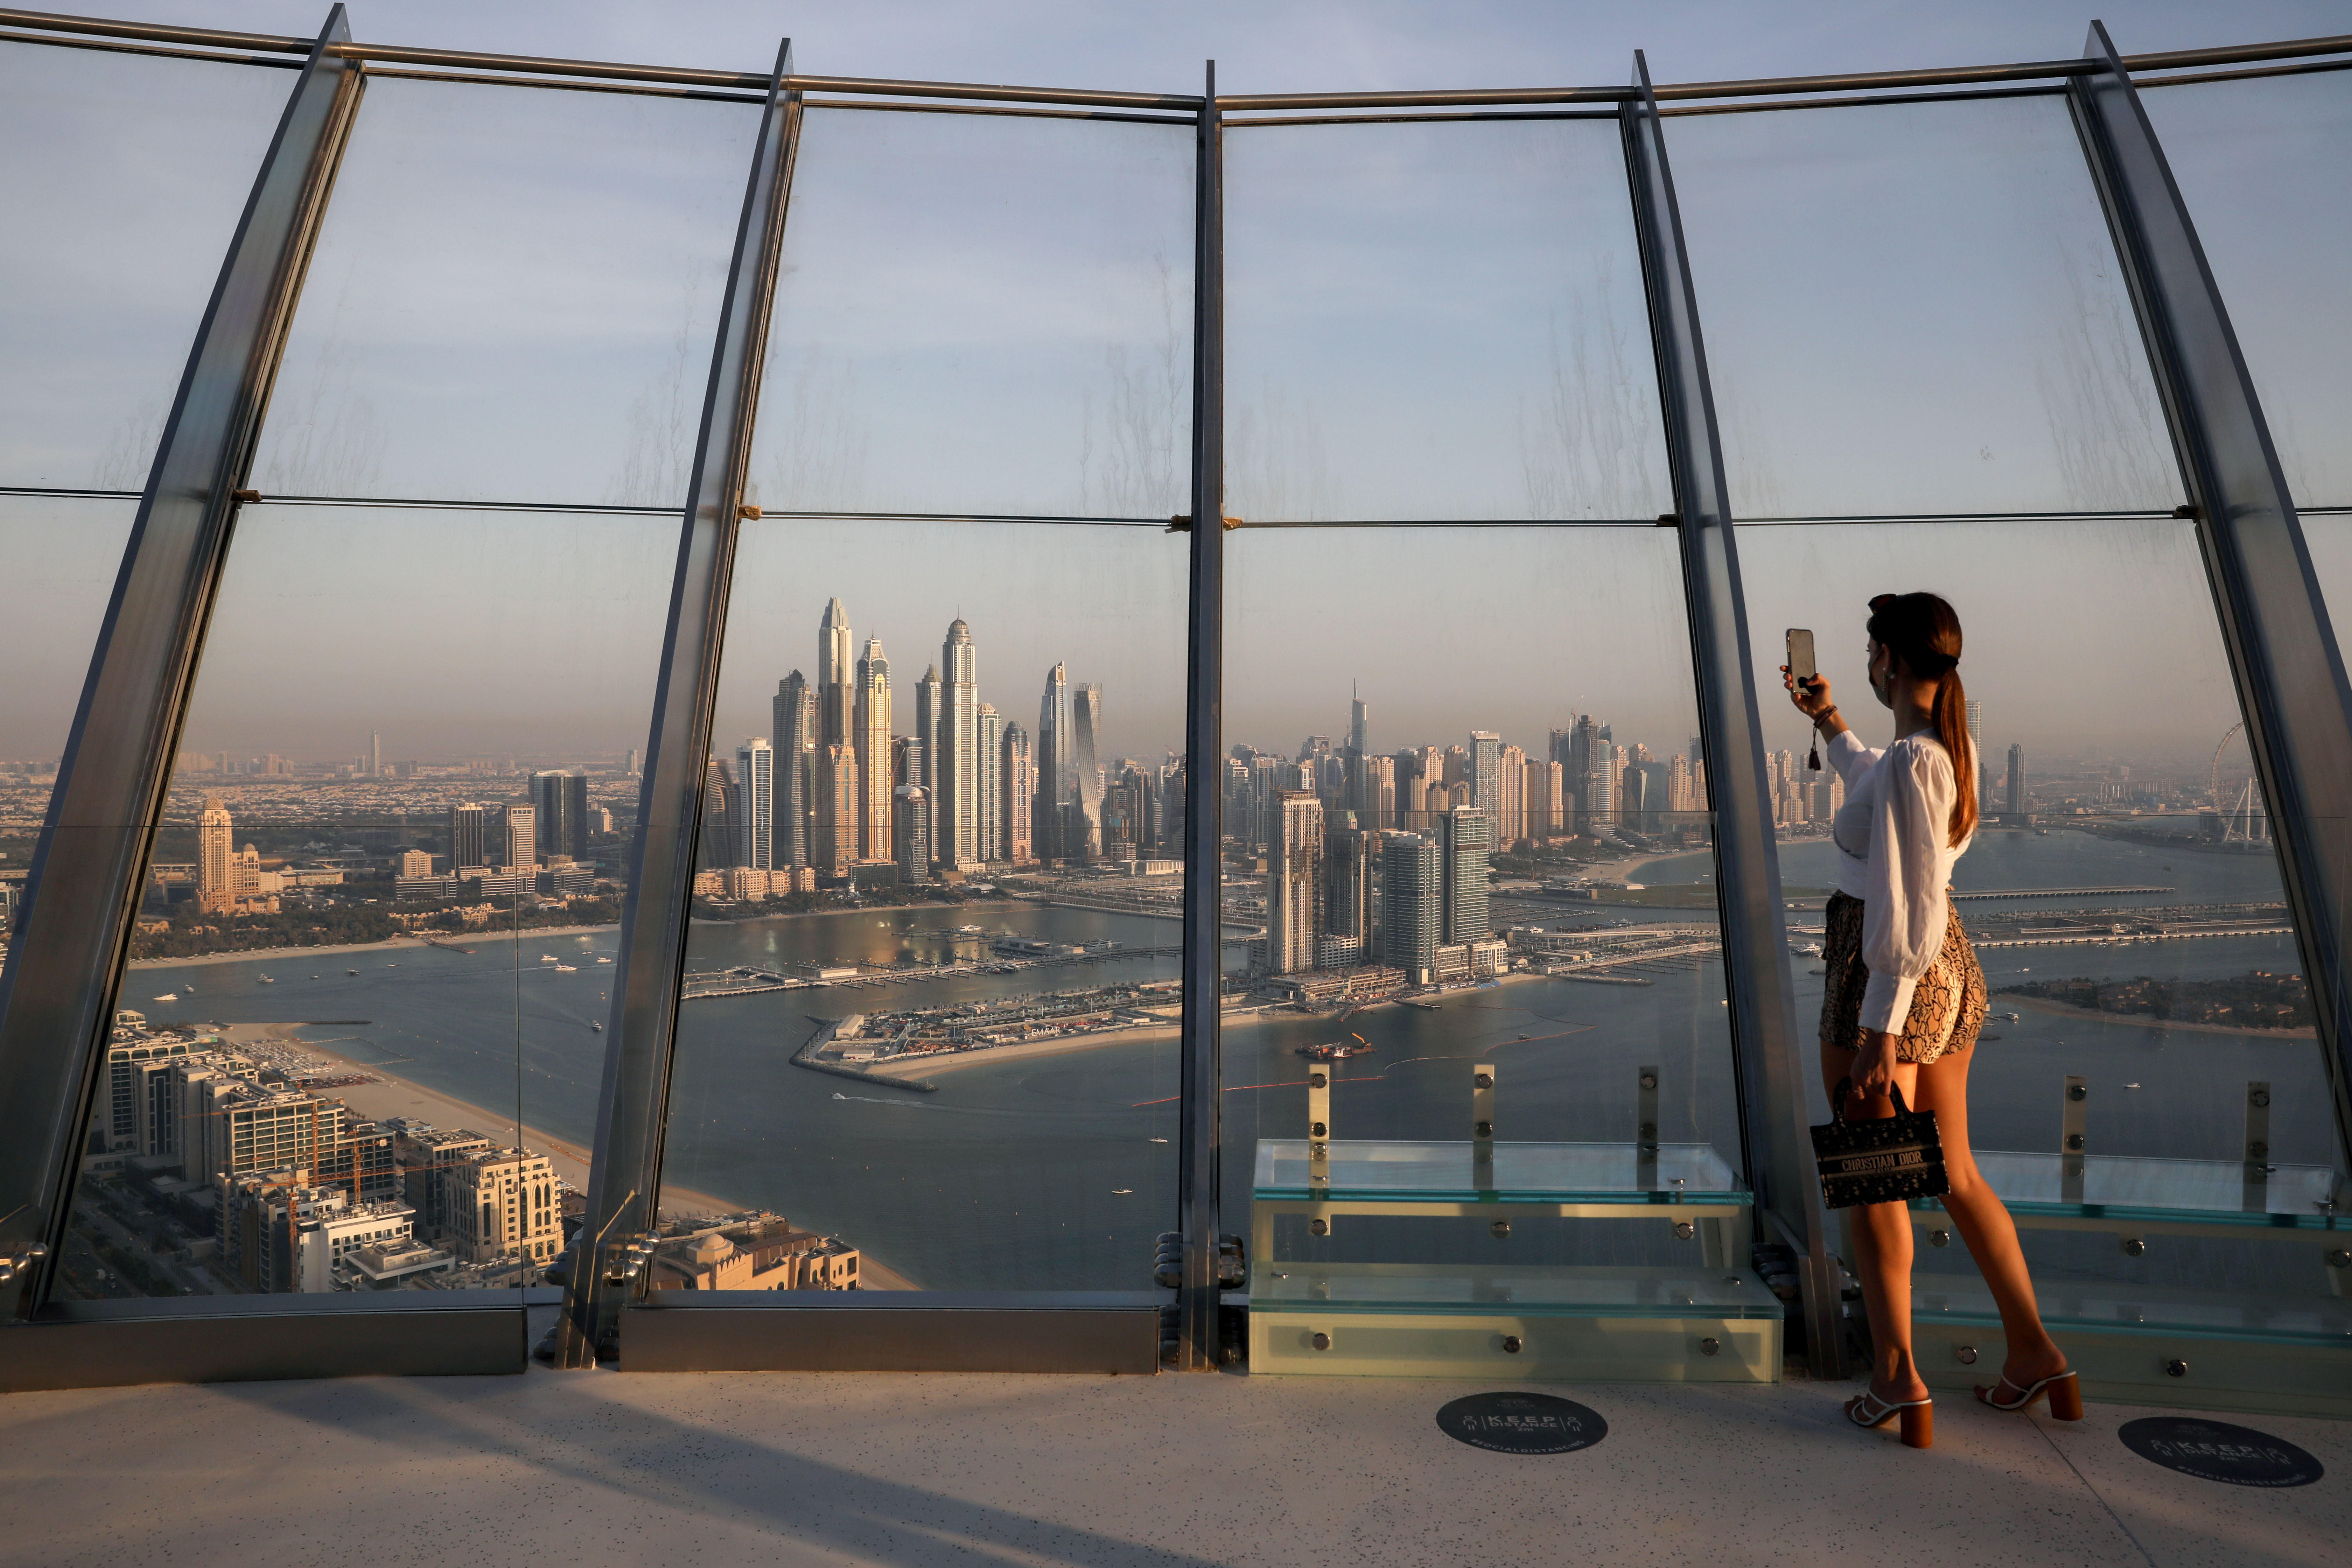 A woman takes a picture with a smartphone of the upscale Marina district from the Palm Tower in Dubai